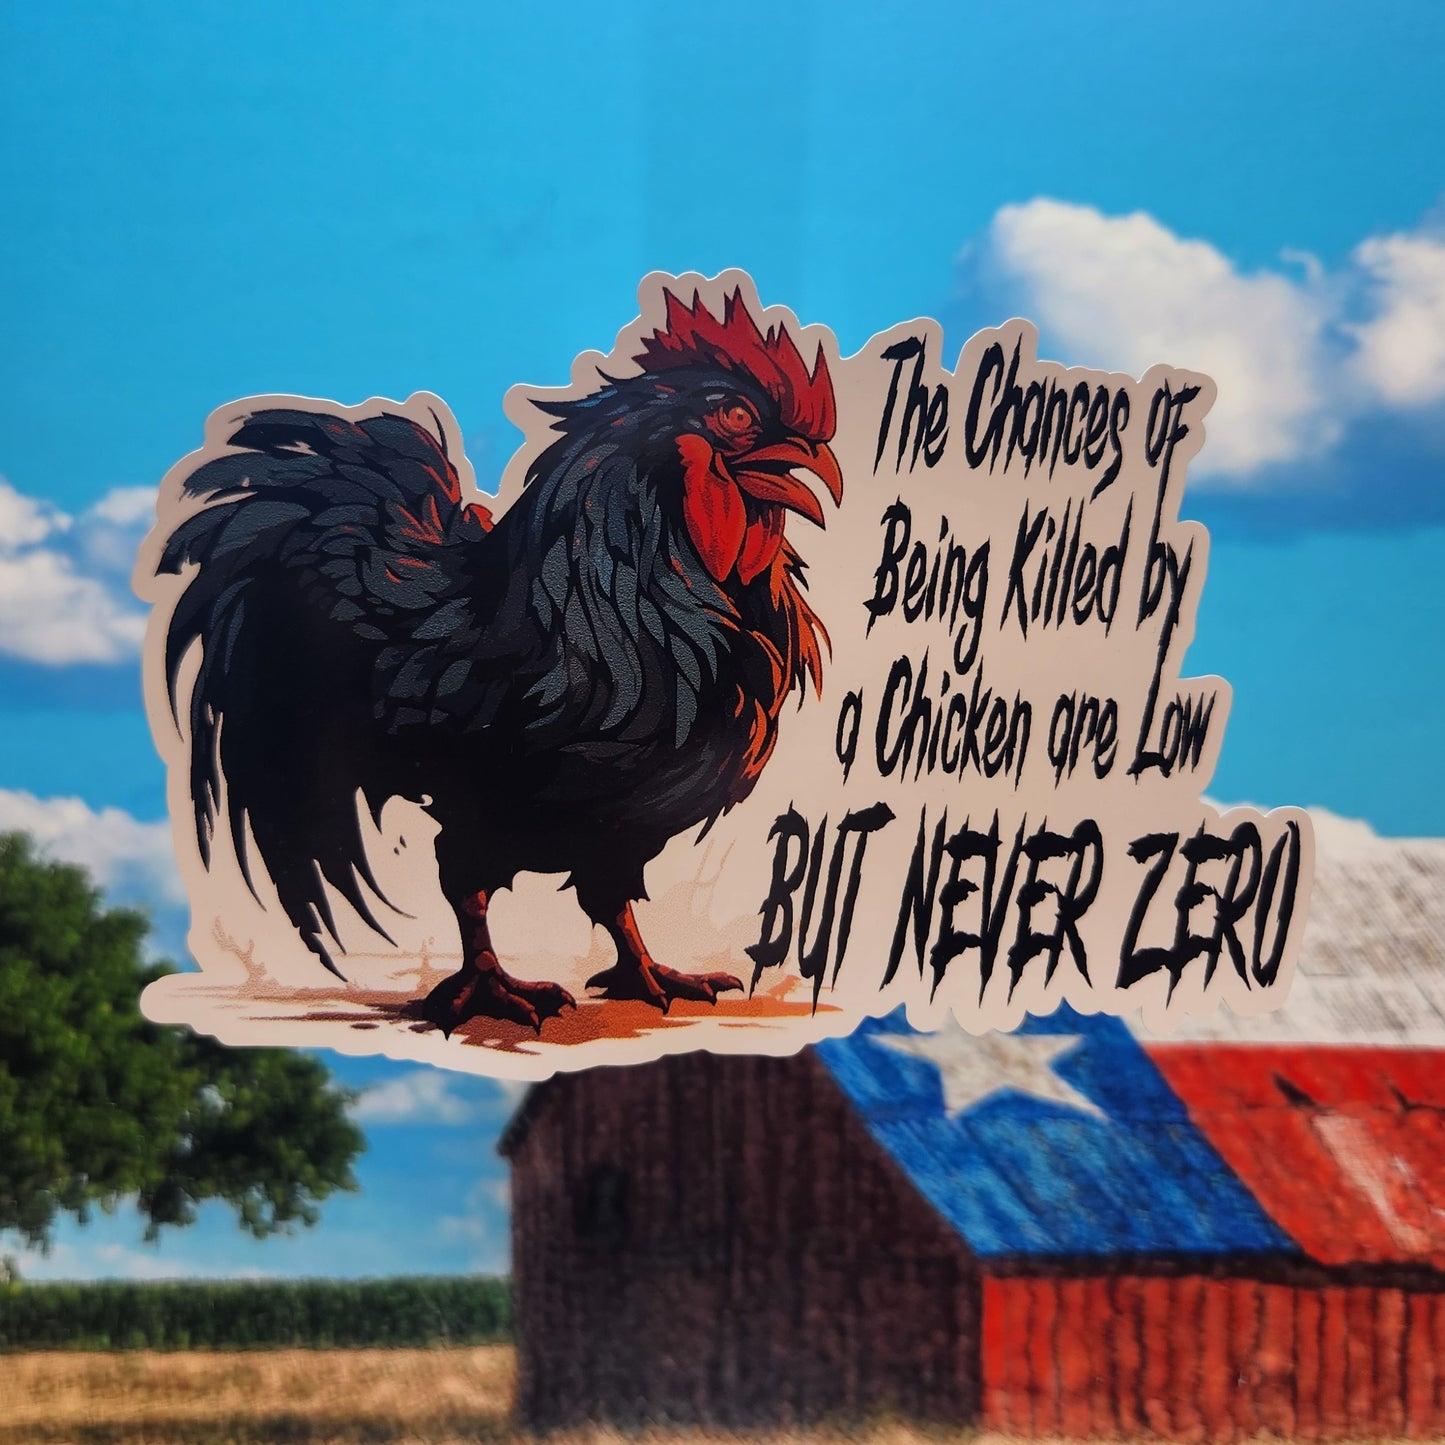 Sticker: Farm/Homestead (Chances of Being Killed by Chicken)